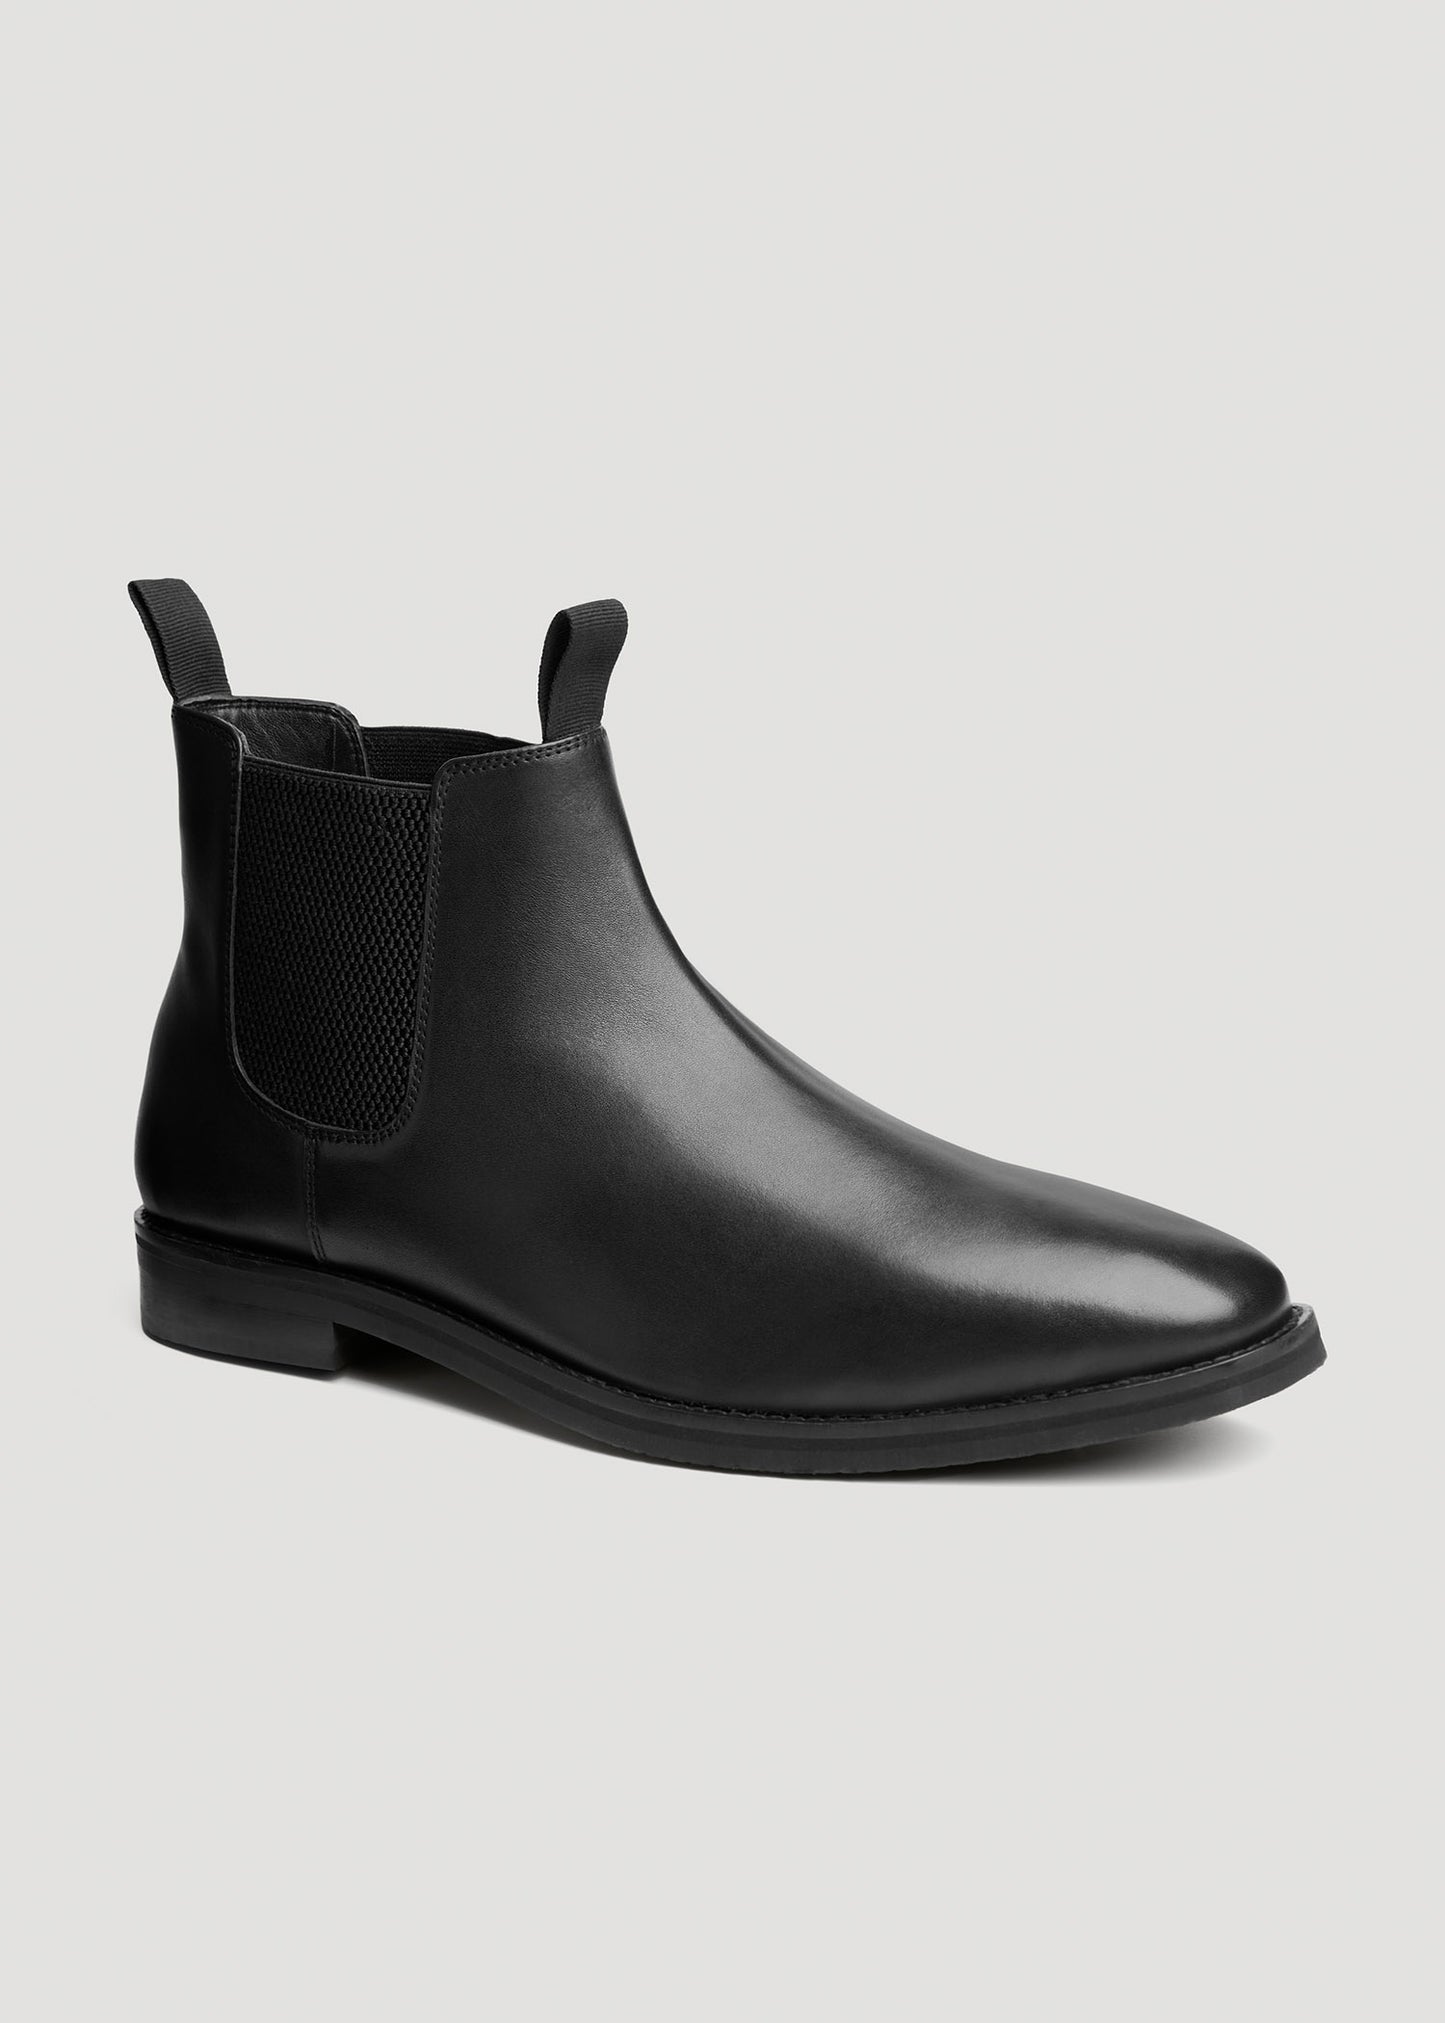       American-Tall-Men-Chelsea-Boots-Black-front